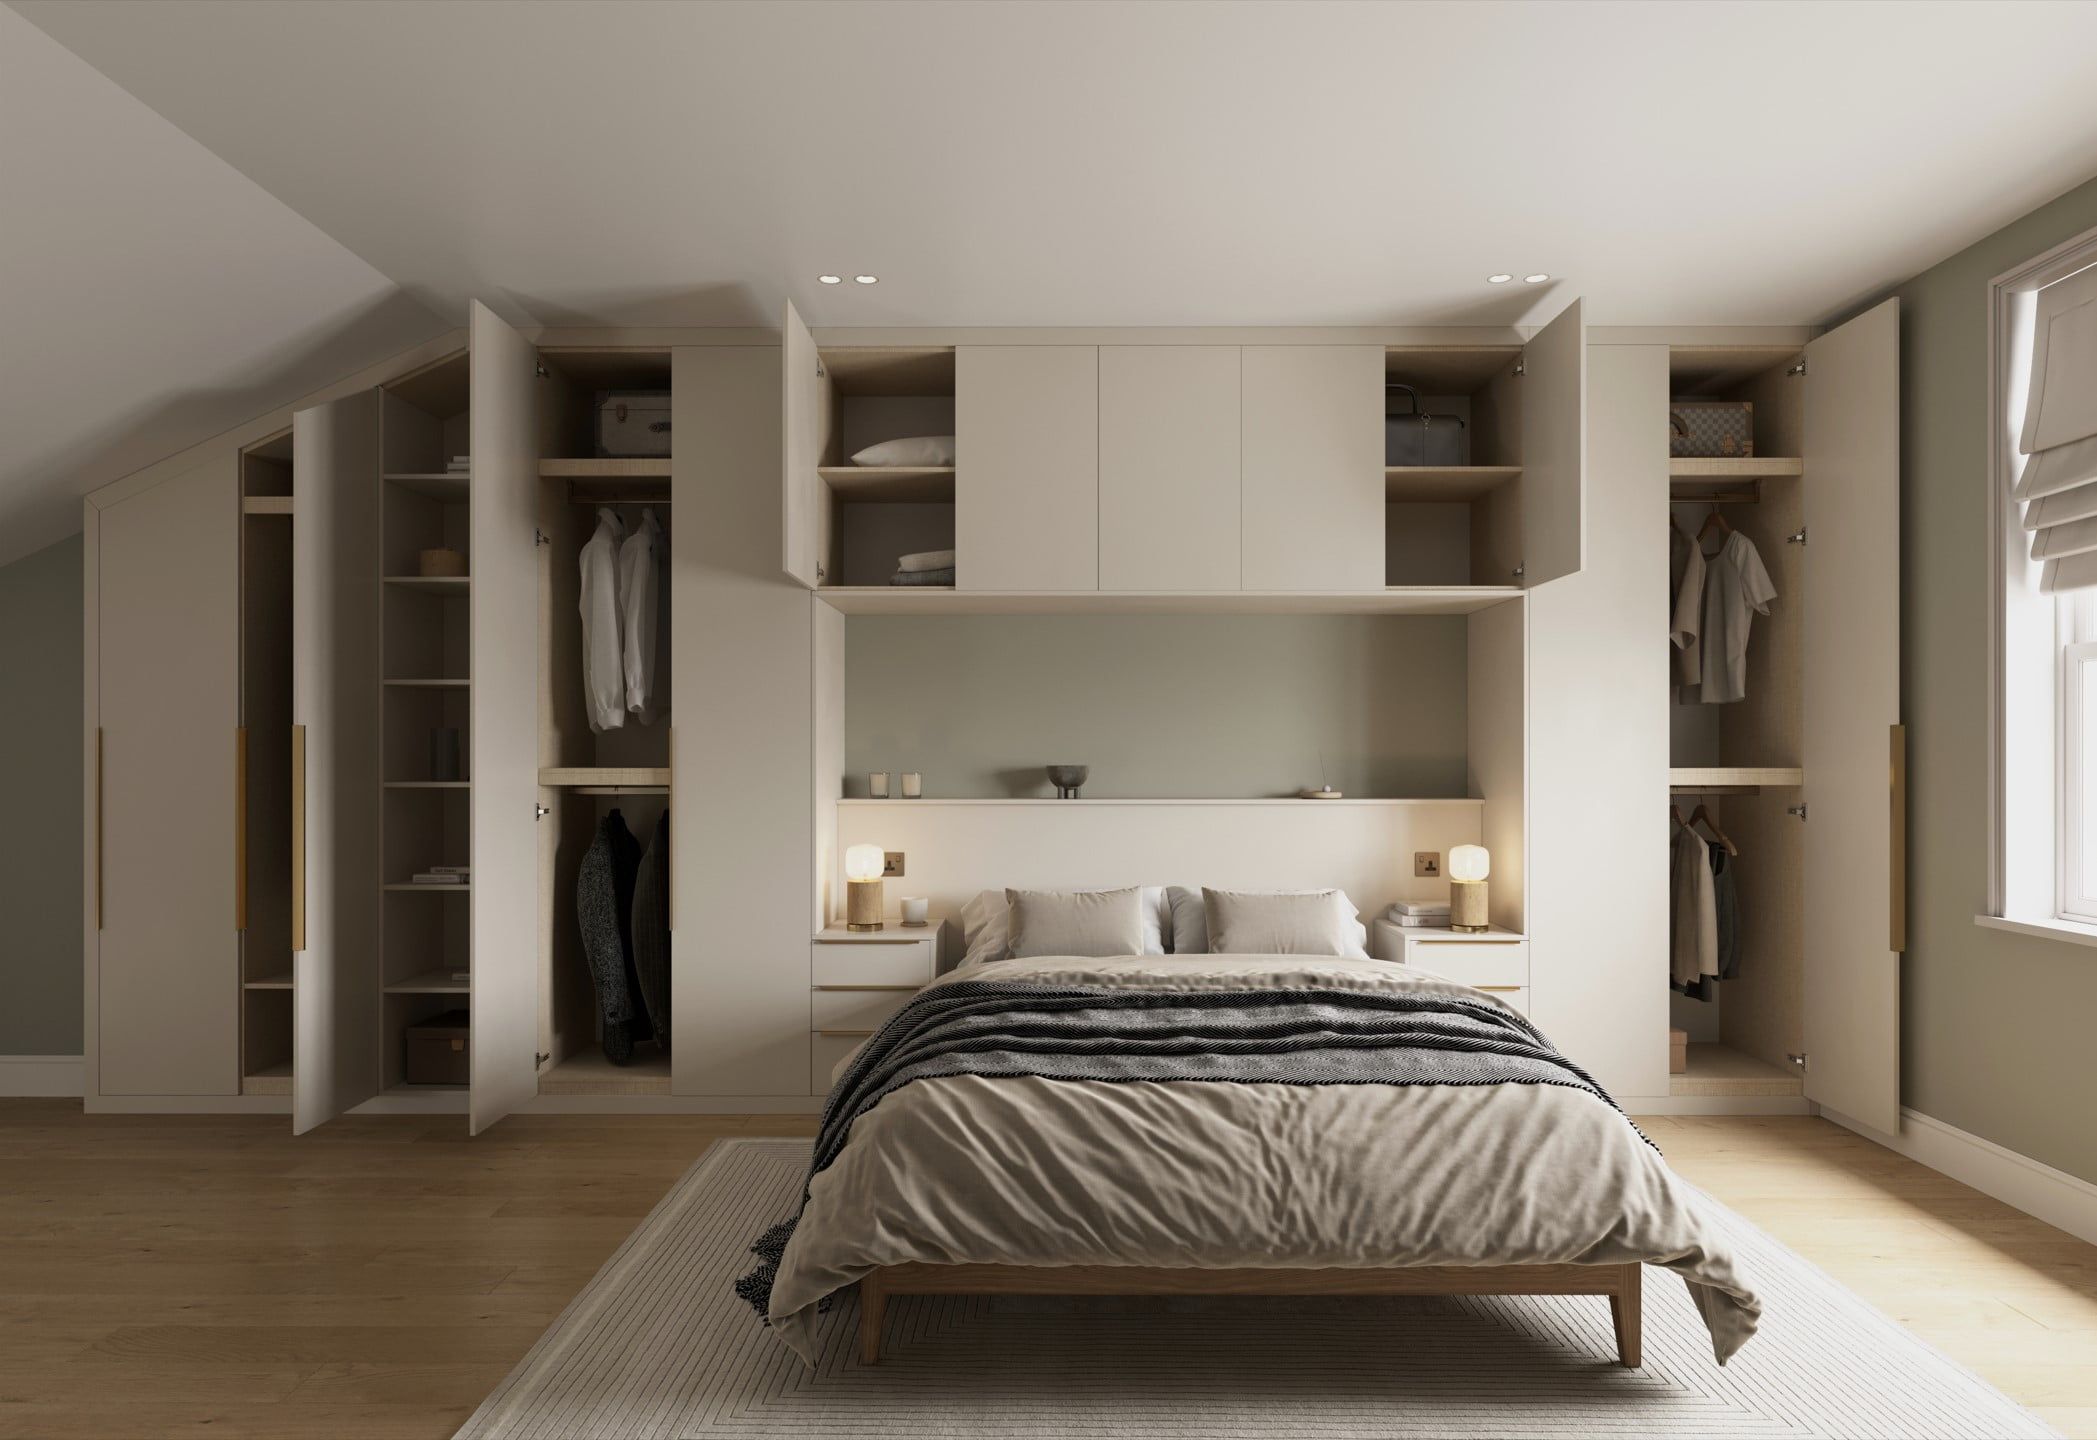 Overbed Fitted Wardrobes And Storage Units, Bespoke Overhead Storage Within Overbed Wardrobes (View 5 of 20)